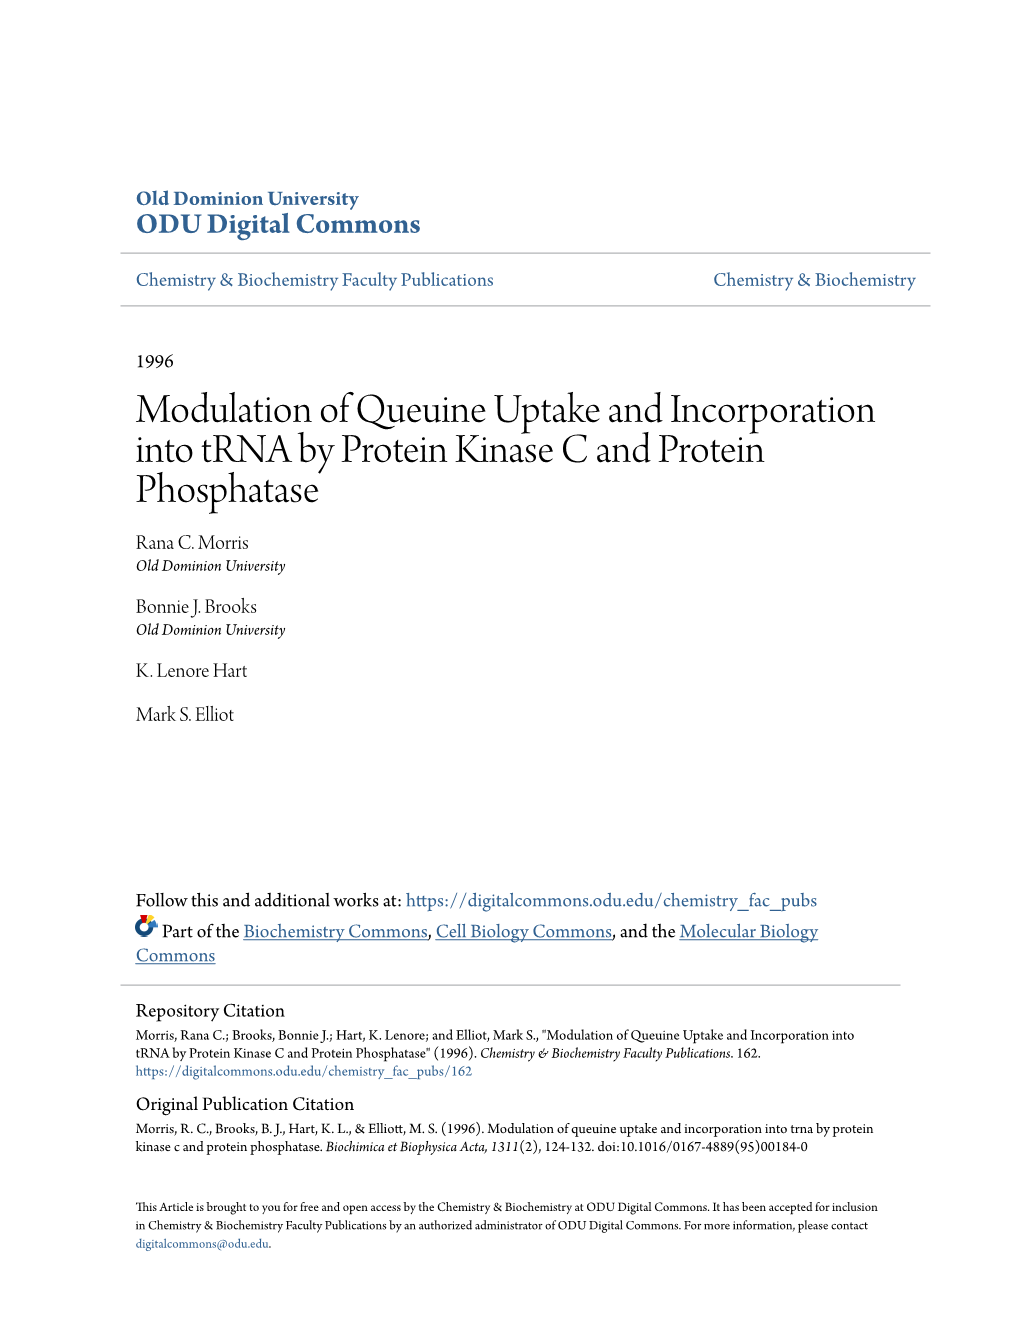 Modulation of Queuine Uptake and Incorporation Into Trna by Protein Kinase C and Protein Phosphatase Rana C